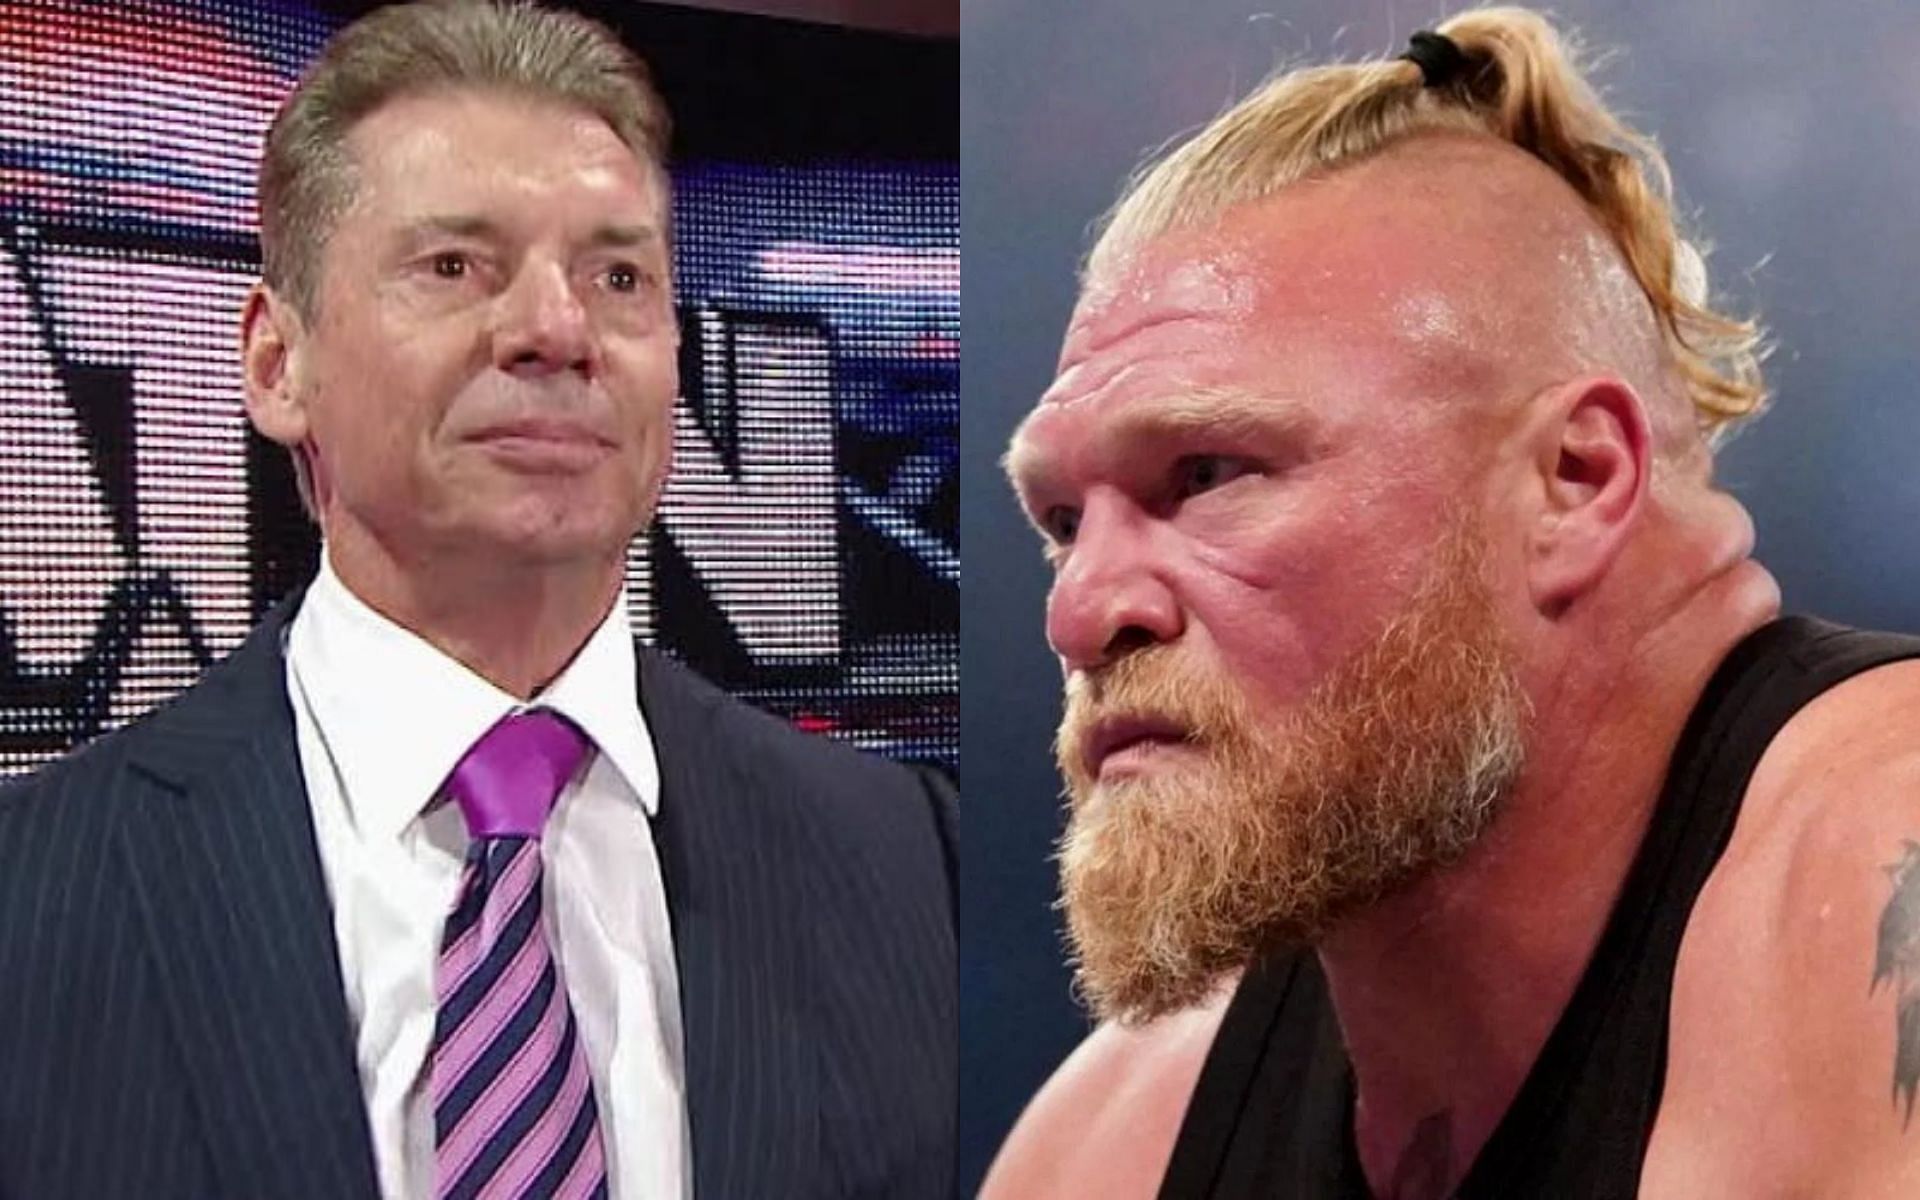 Former WWE chairman Vince McMahon (left) and Brock Lesnar (right).